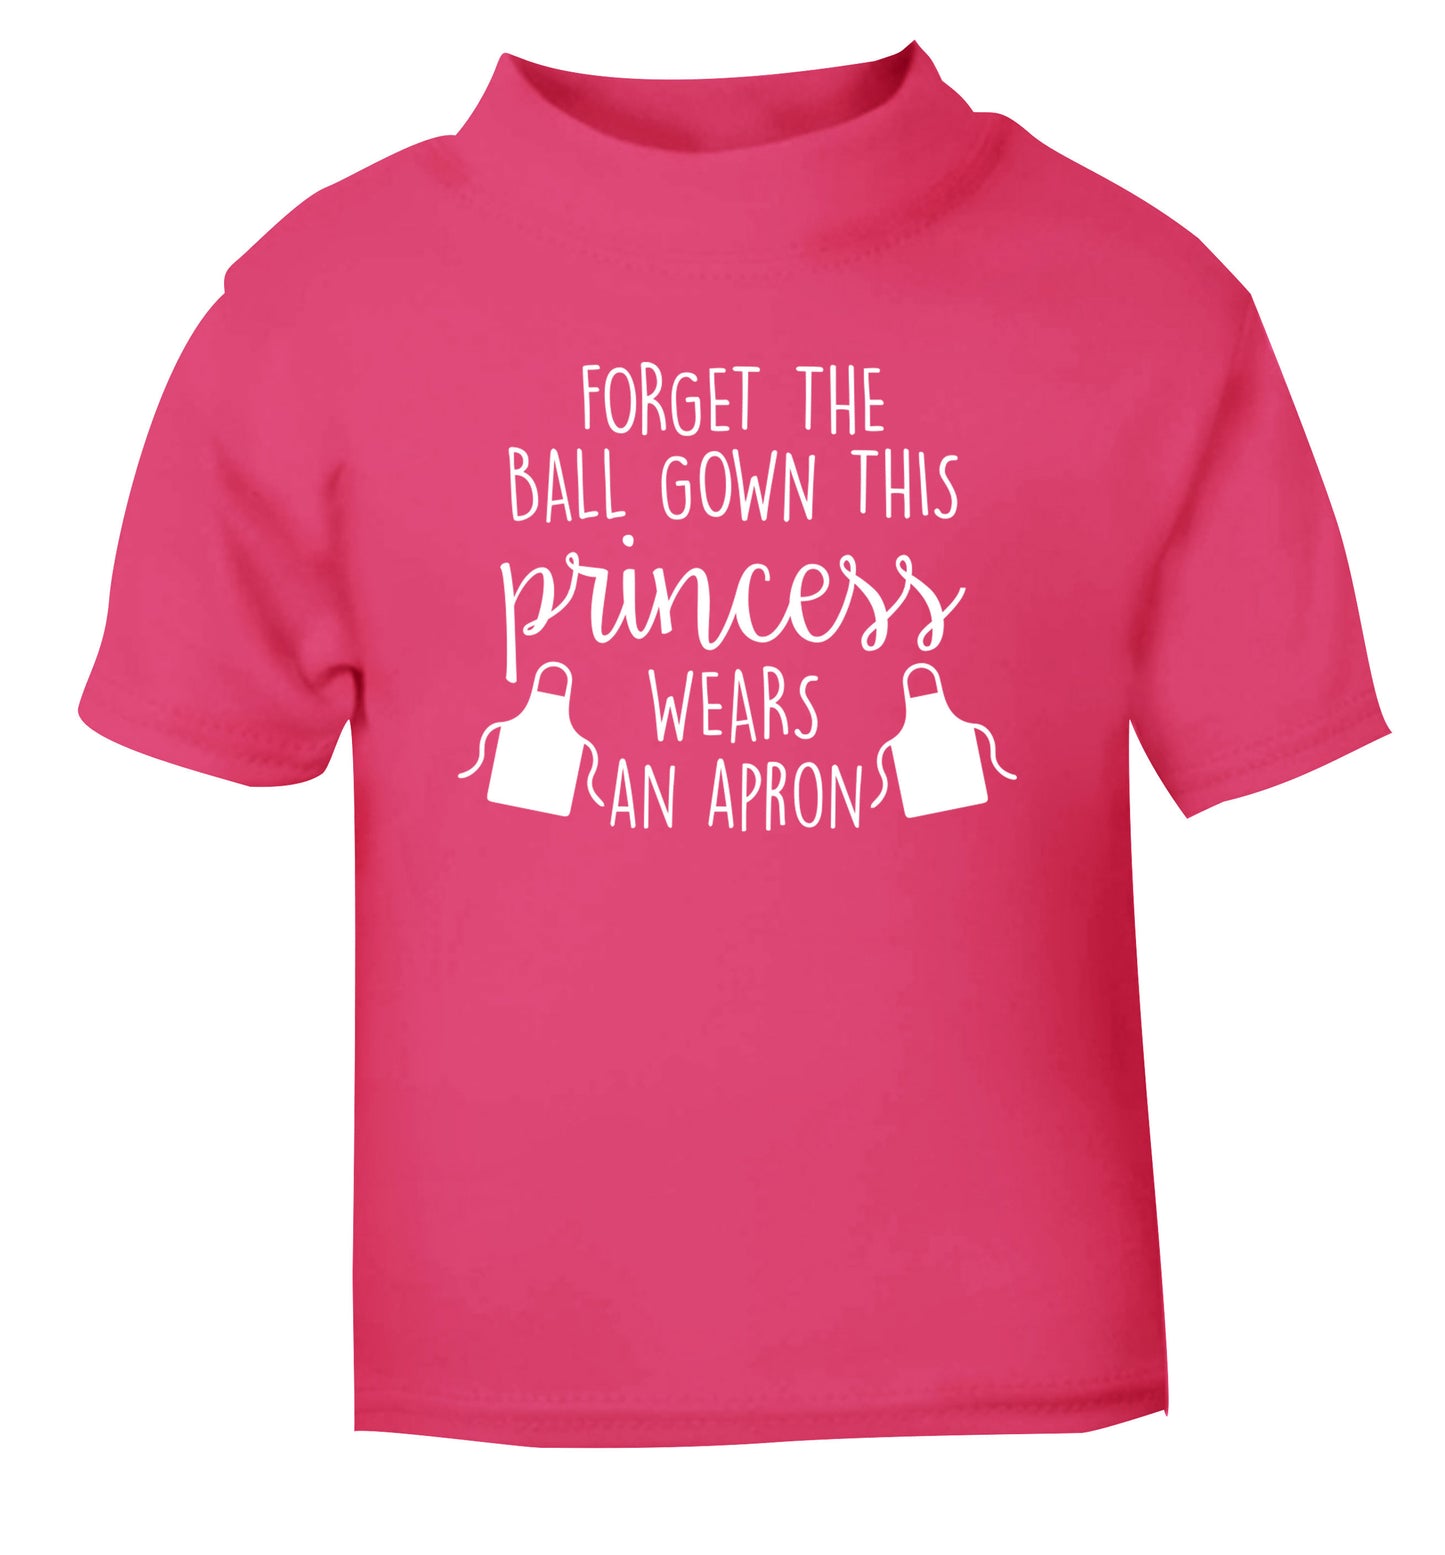 Forget the ball gown this princess wears an apron pink Baby Toddler Tshirt 2 Years